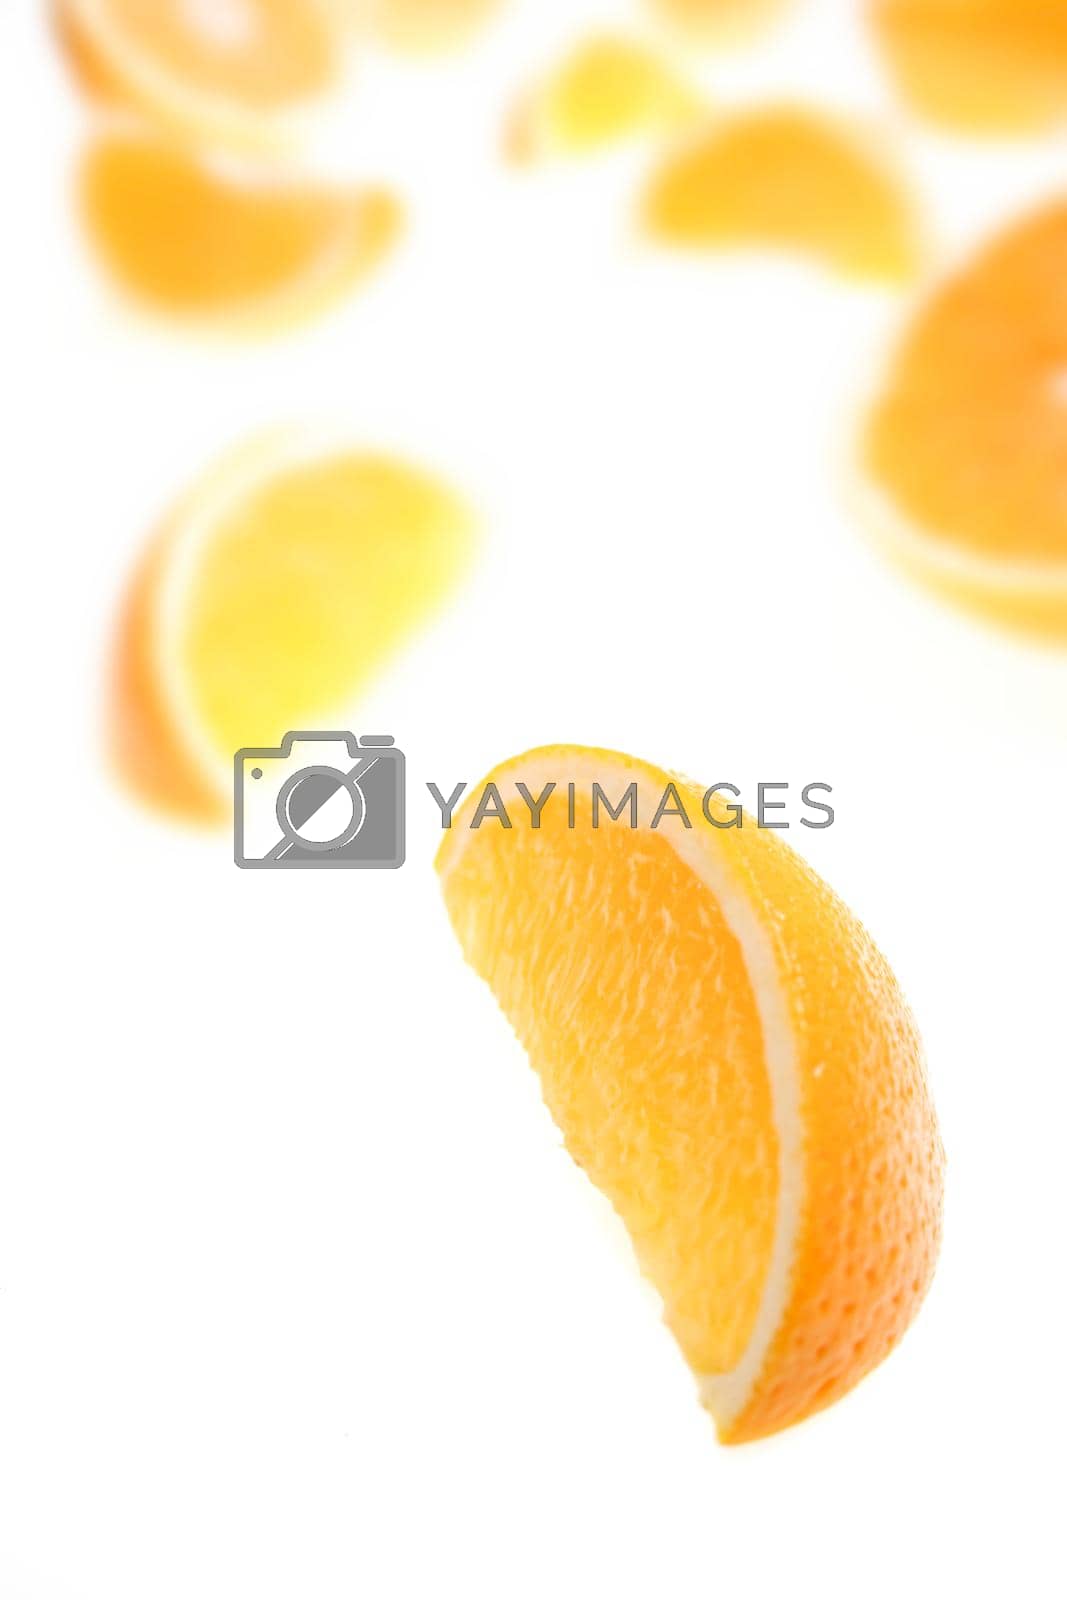 Royalty free image of Oranges by moodboard